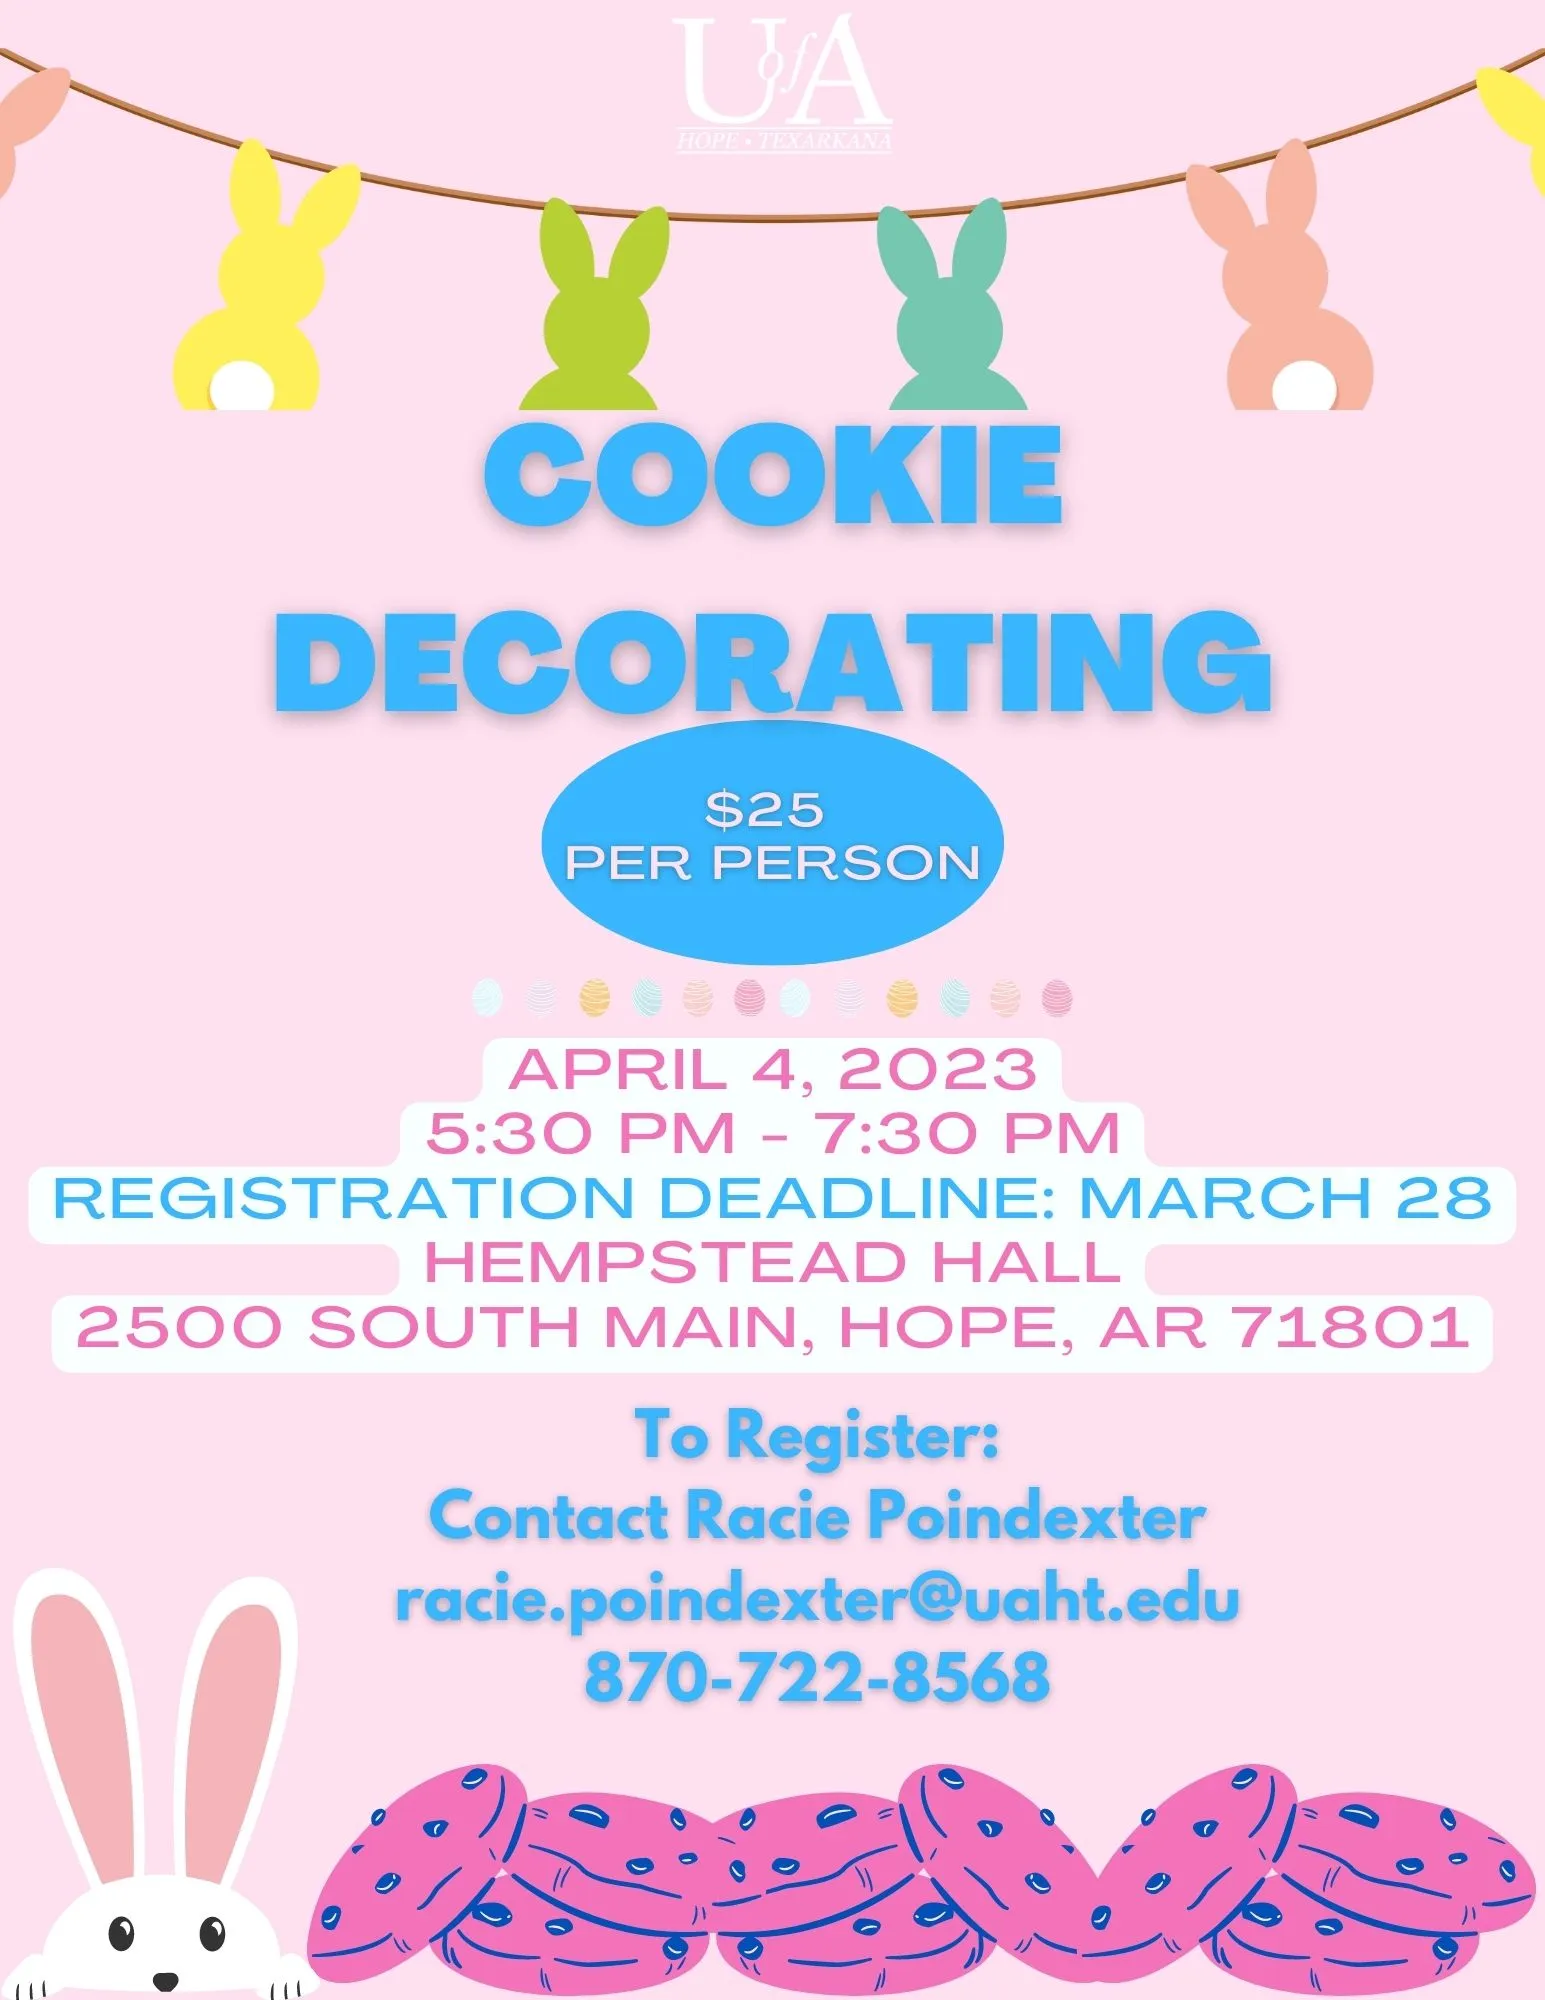 UAHT to Hold Cookie Decorating Class